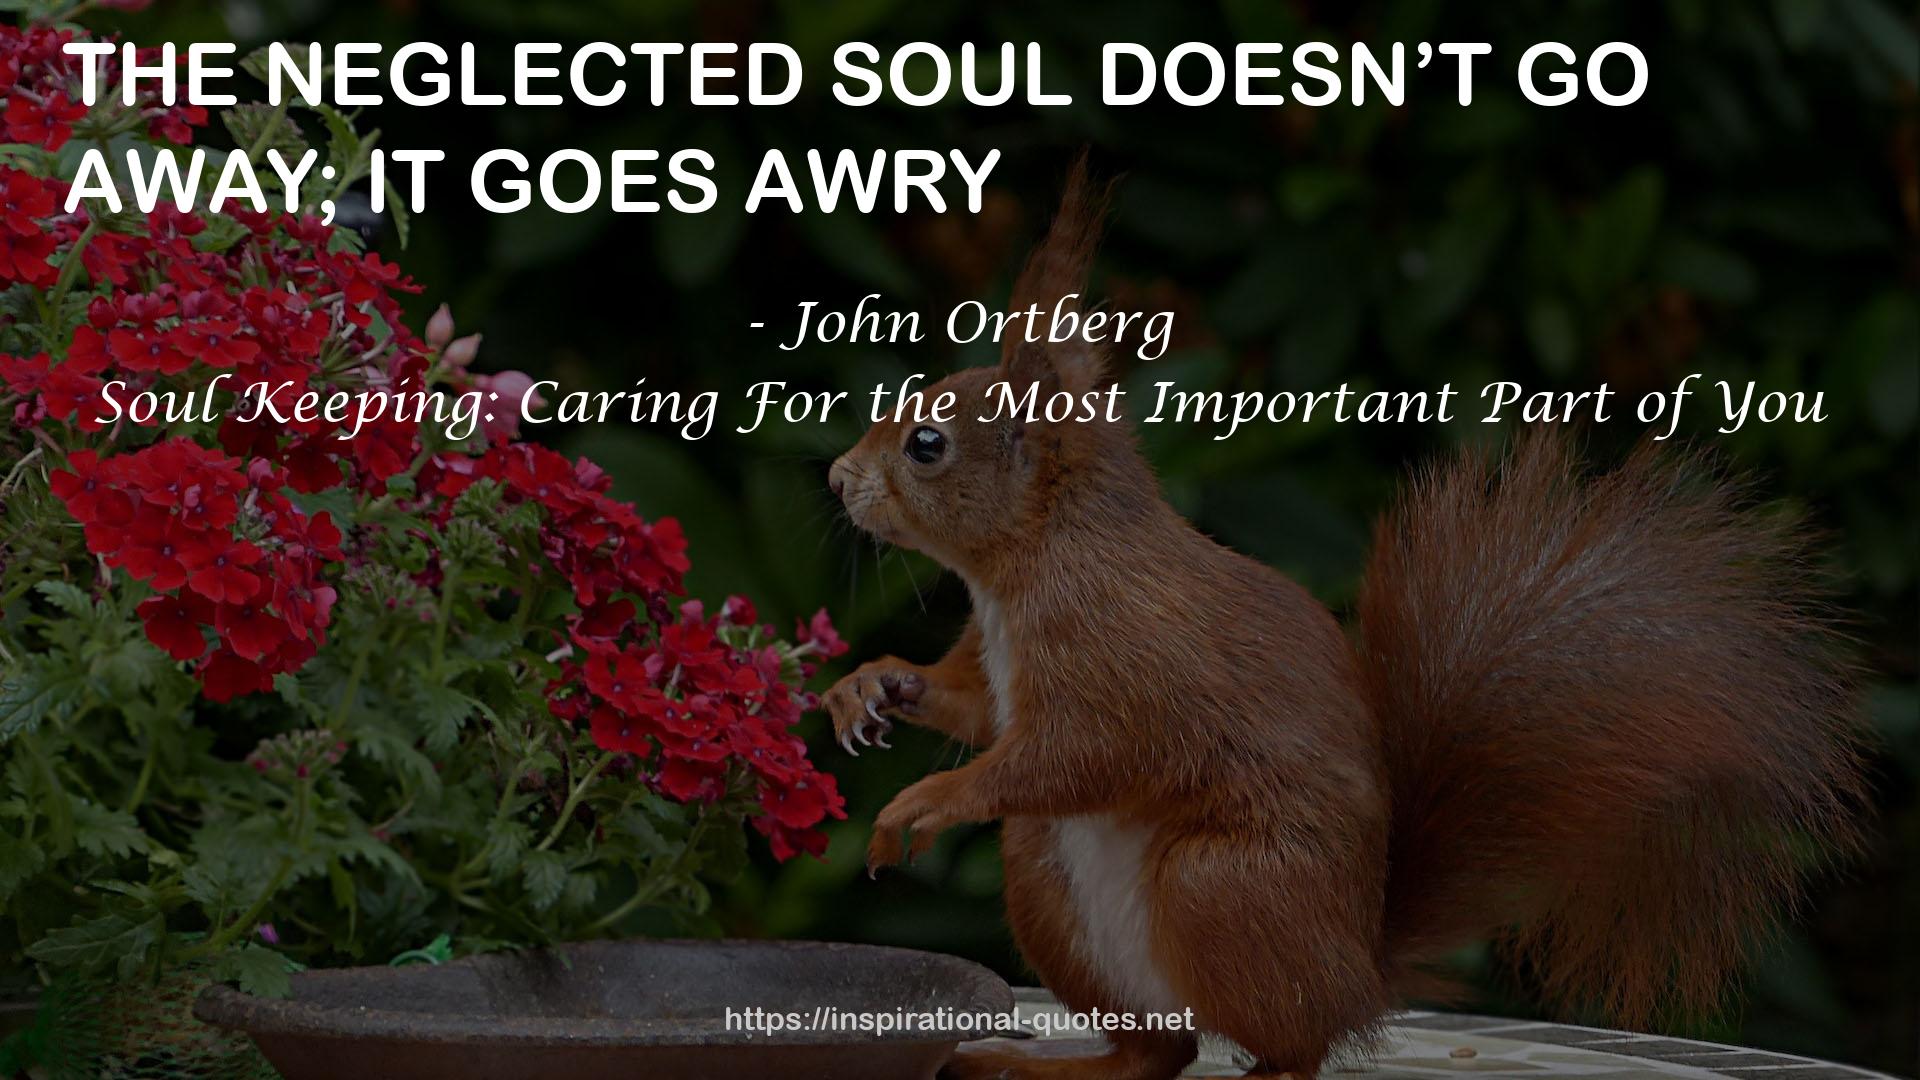 Soul Keeping: Caring For the Most Important Part of You QUOTES